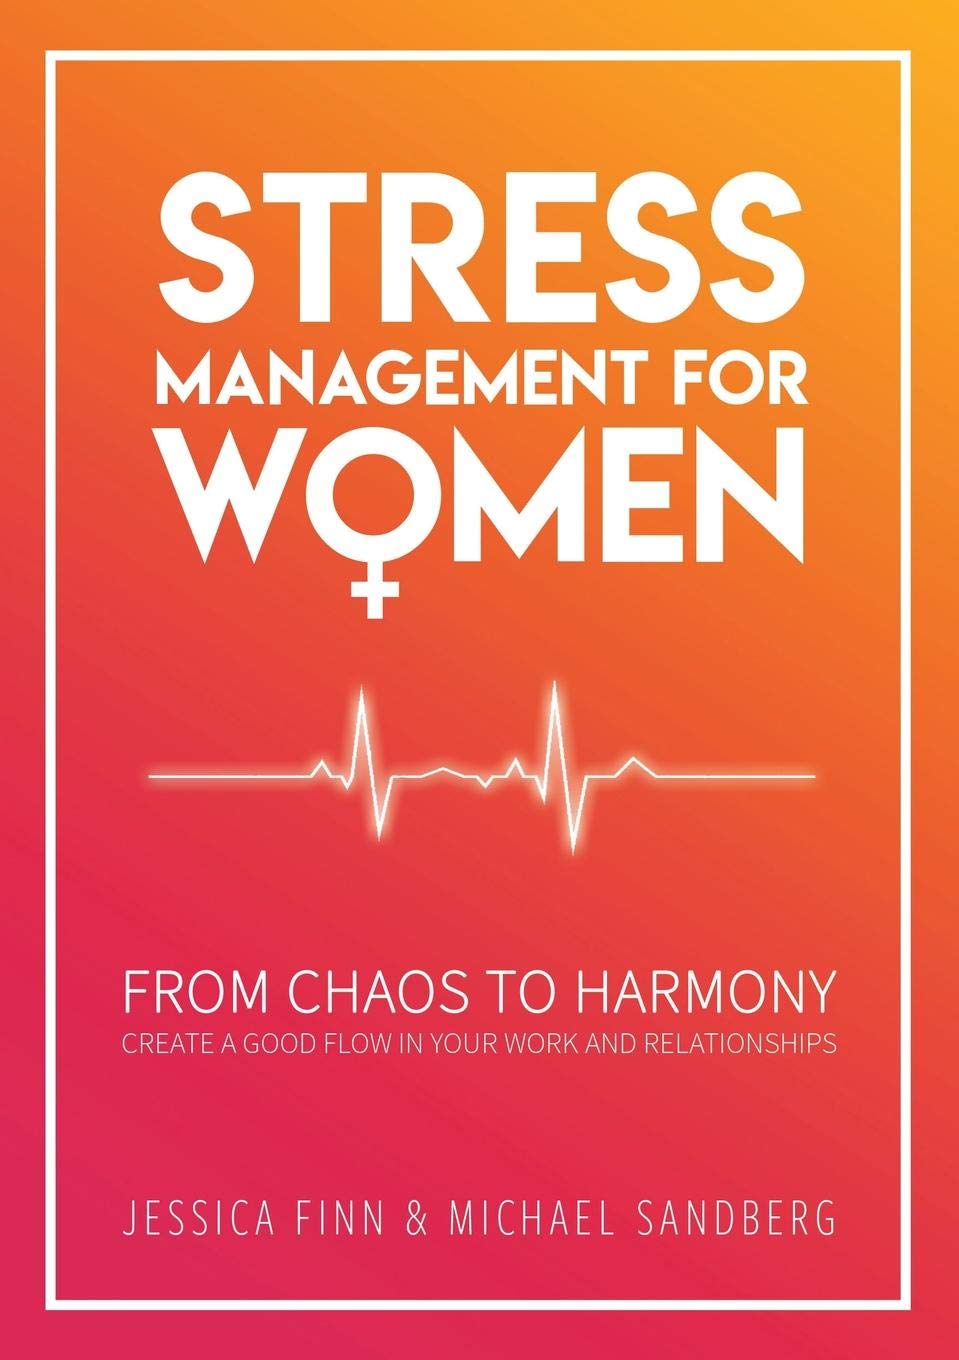 Аудиокниги стресс. Jessica Finn. Books for stress Management. From Chaos to Harmony. From Chaos to order.